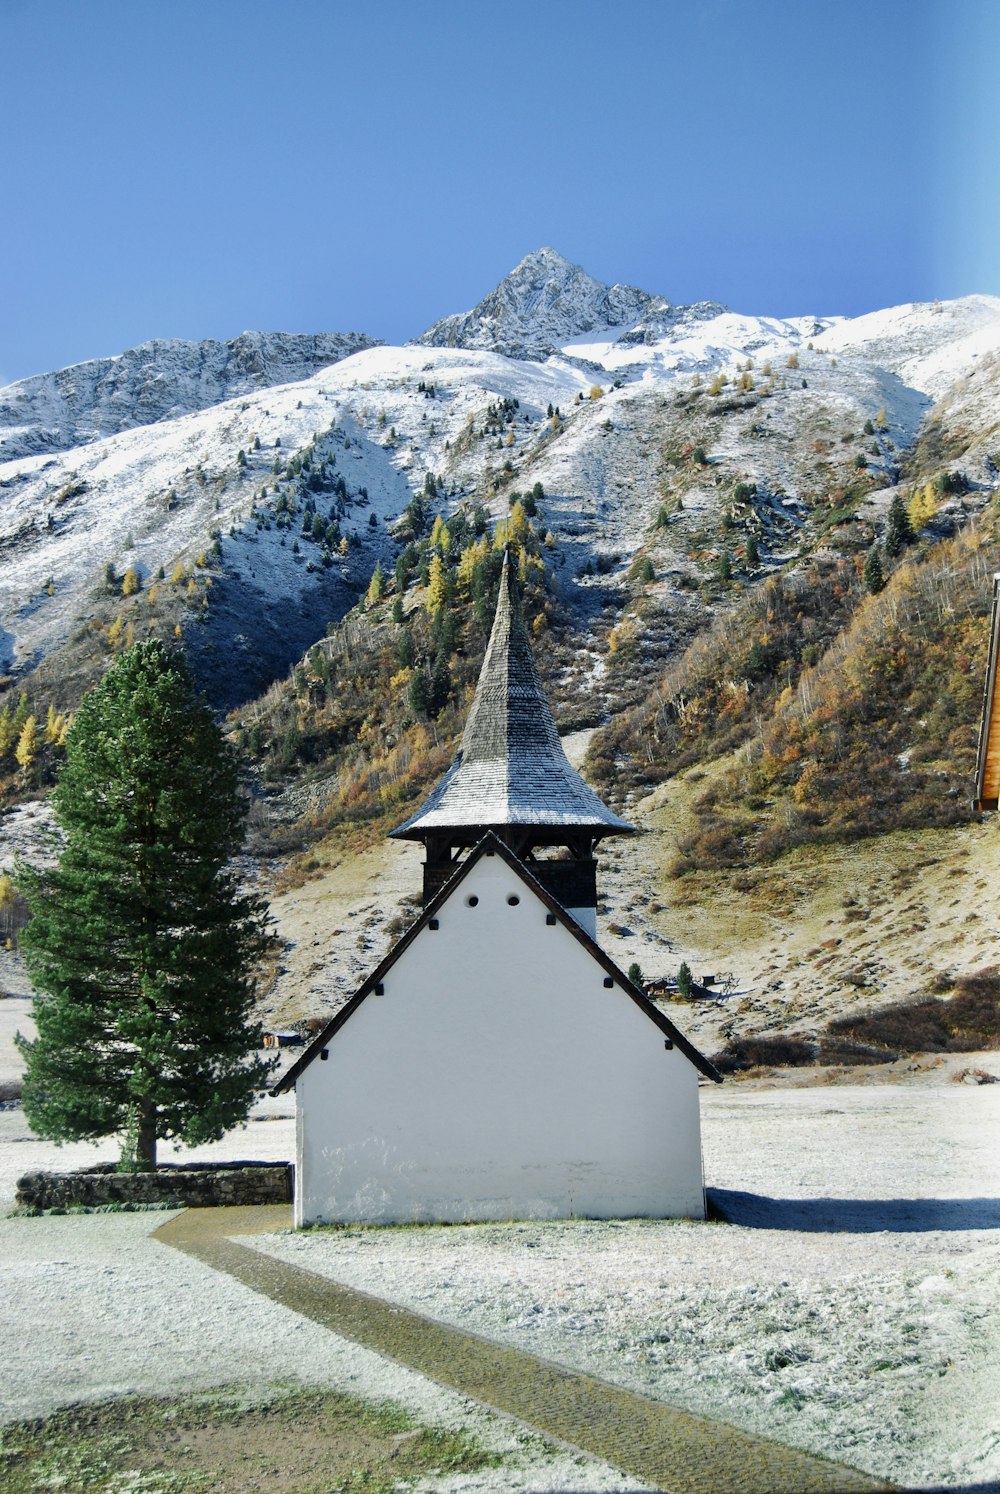 a small white building with a steeple in front of a snowy mountain